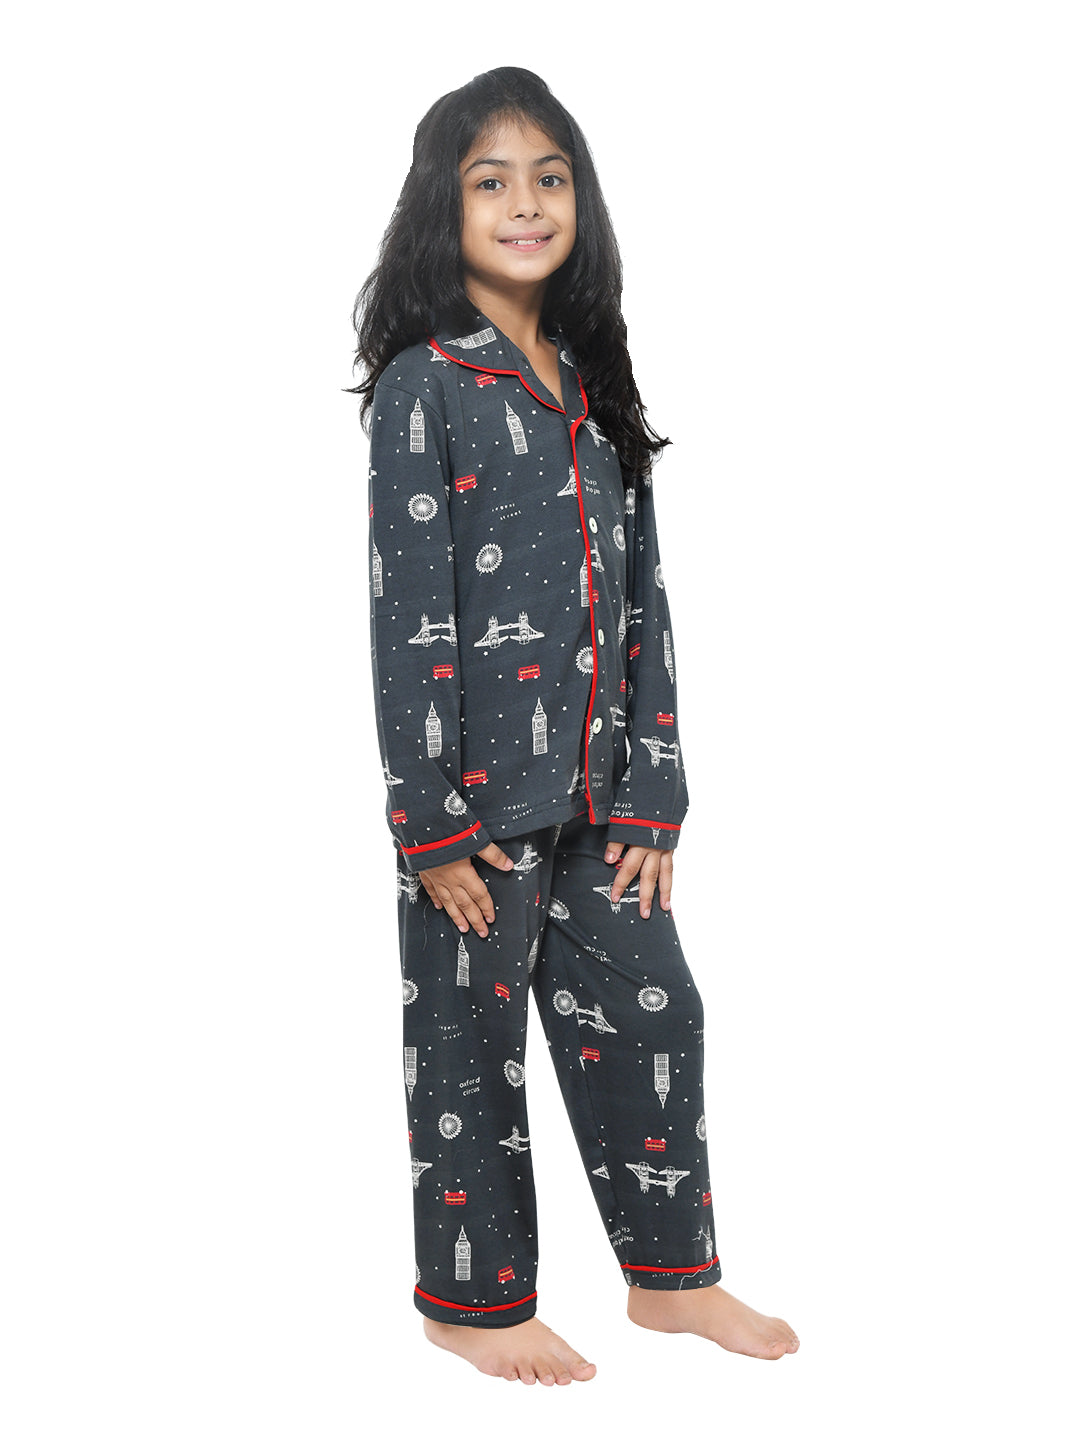 Comfortable 100% Cotton Kids Night Suit shirt and trouser - Cozy Nights for  Little Ones Wash and Wear fabric